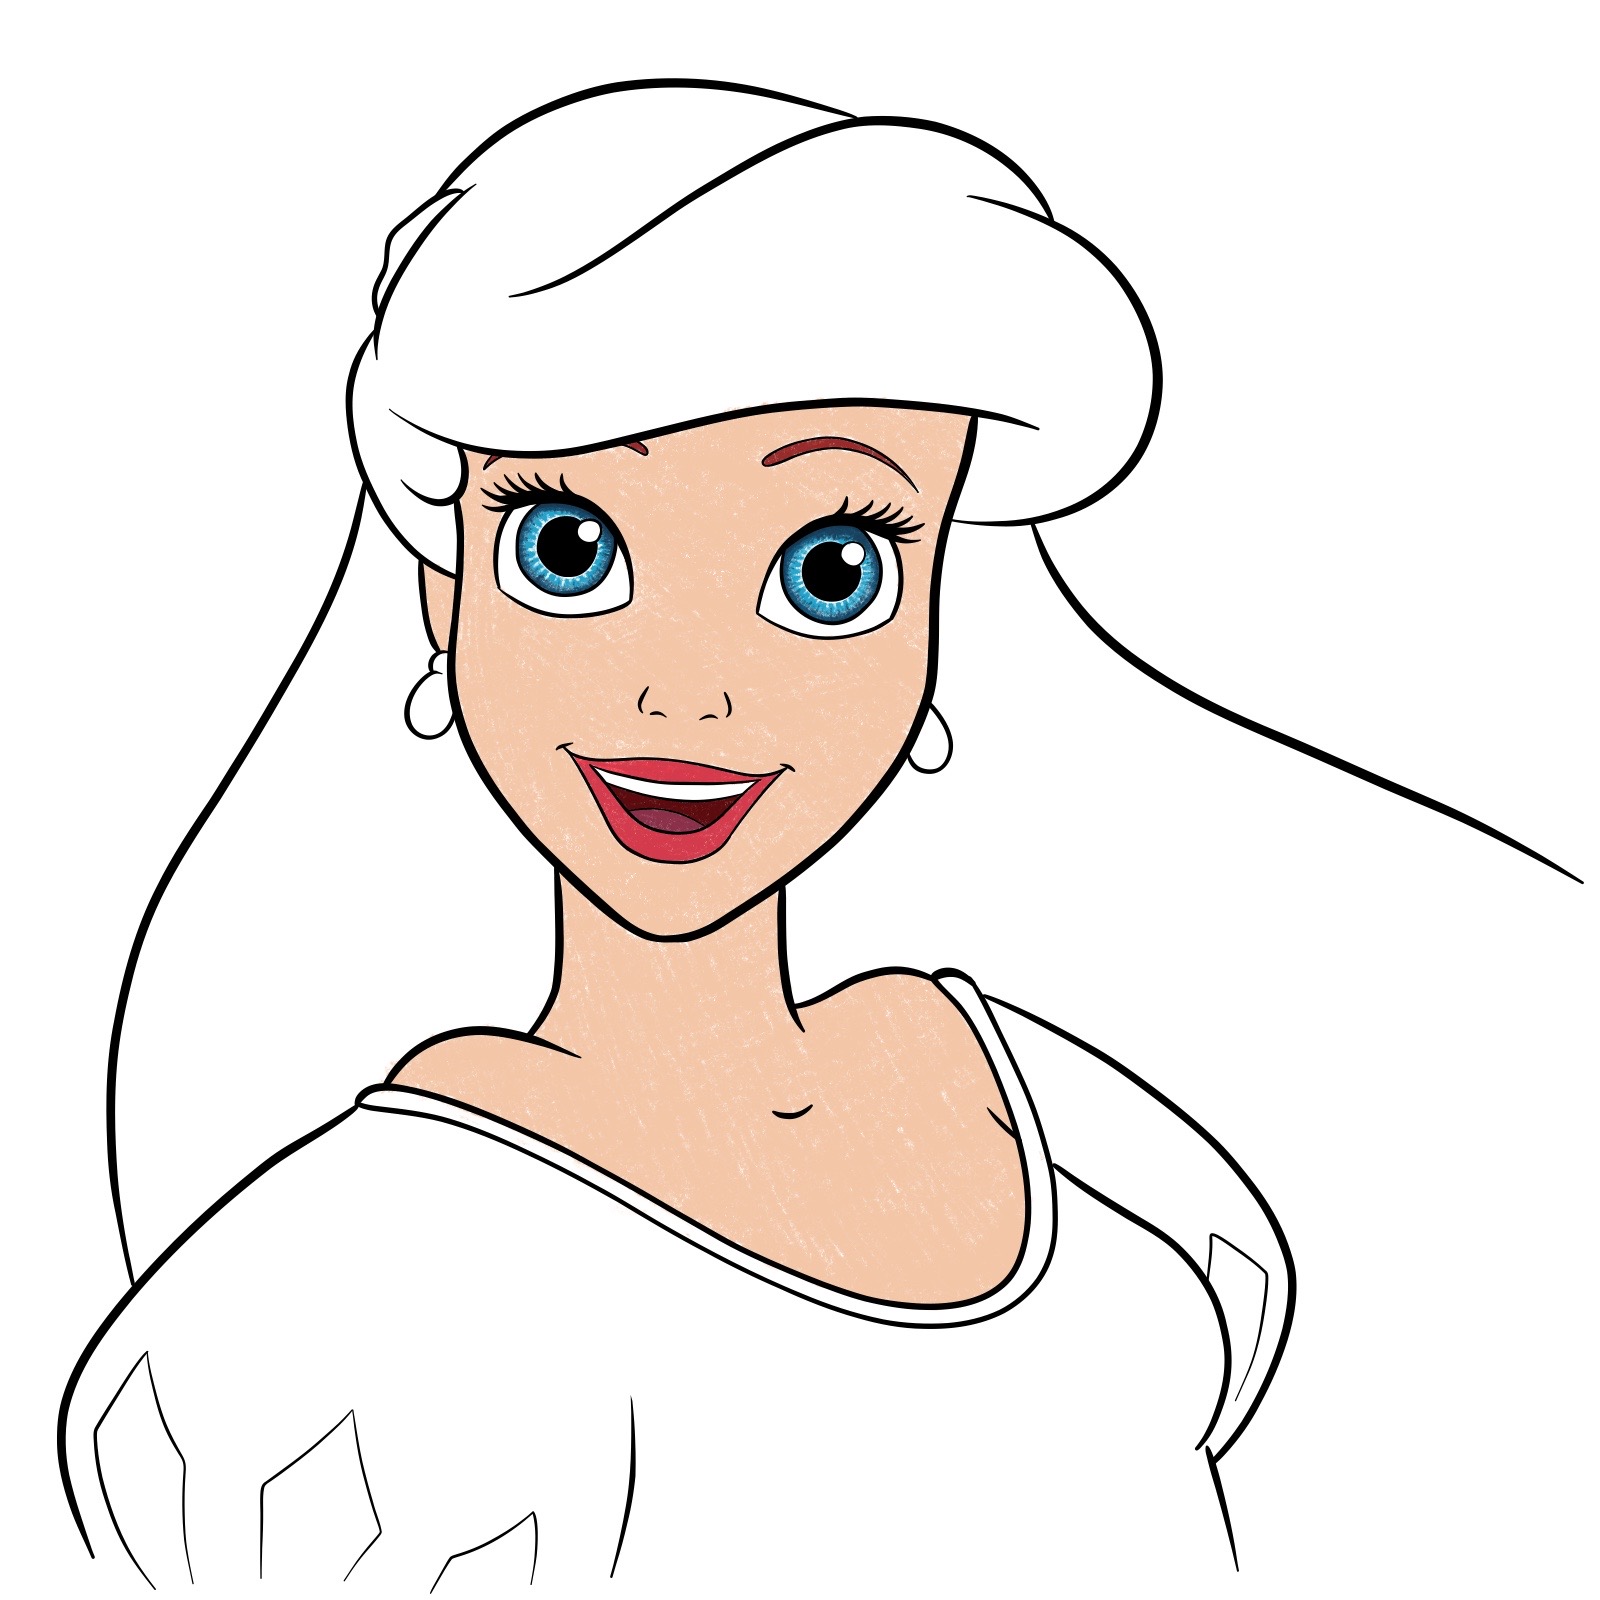 How to draw Ariel's face - The Little Mermaid - step 33